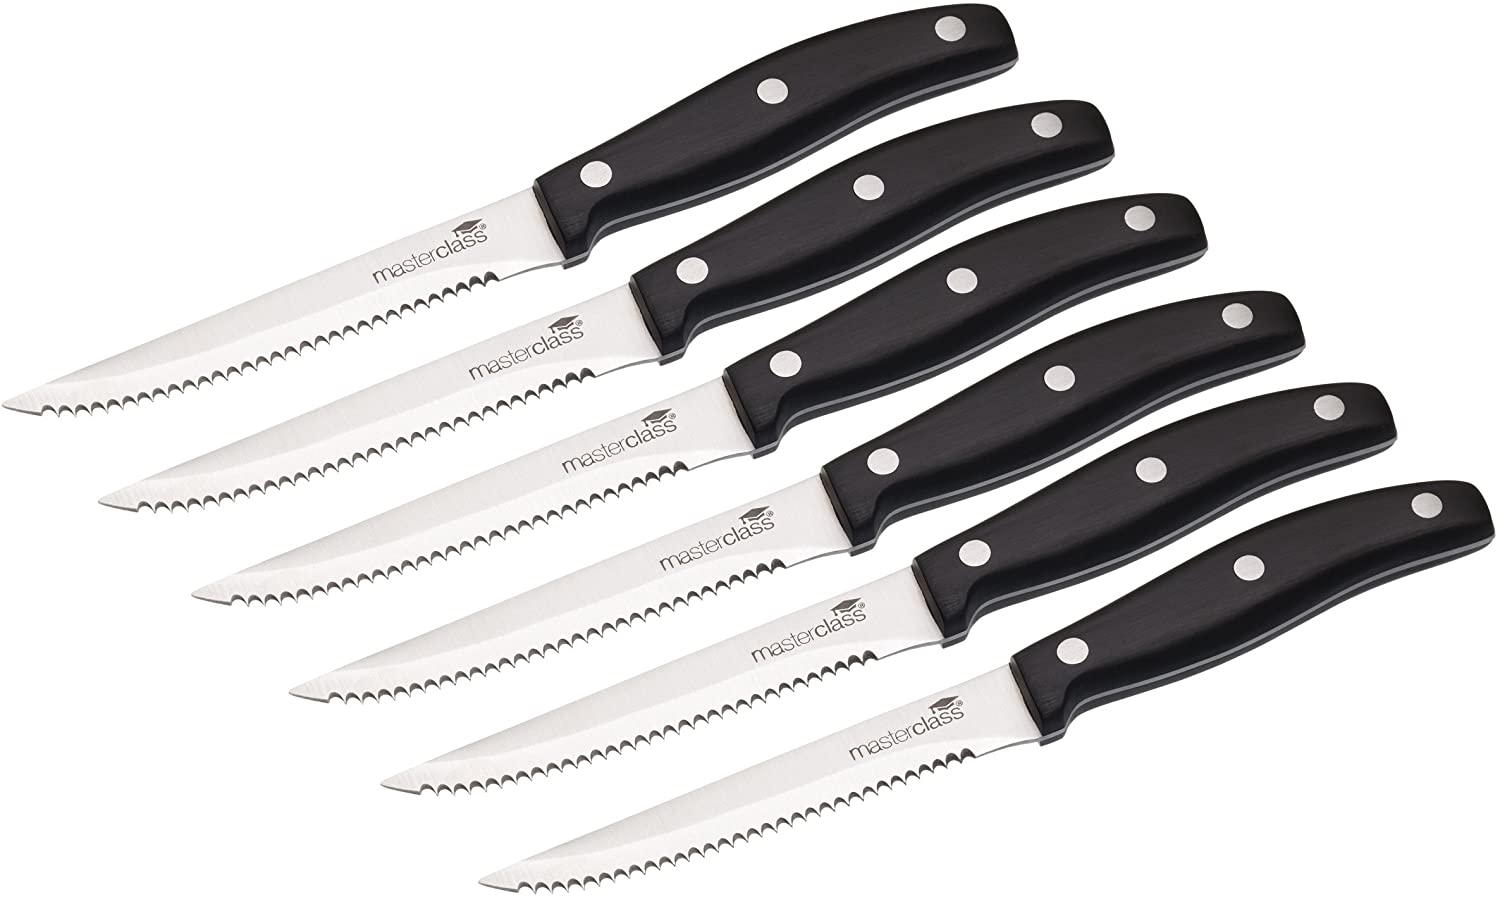 Kitchen Craft MasterClass 6 11cm Deluxe Steak Knives with Corrosion Resistant Serrated Blades - Set of 6